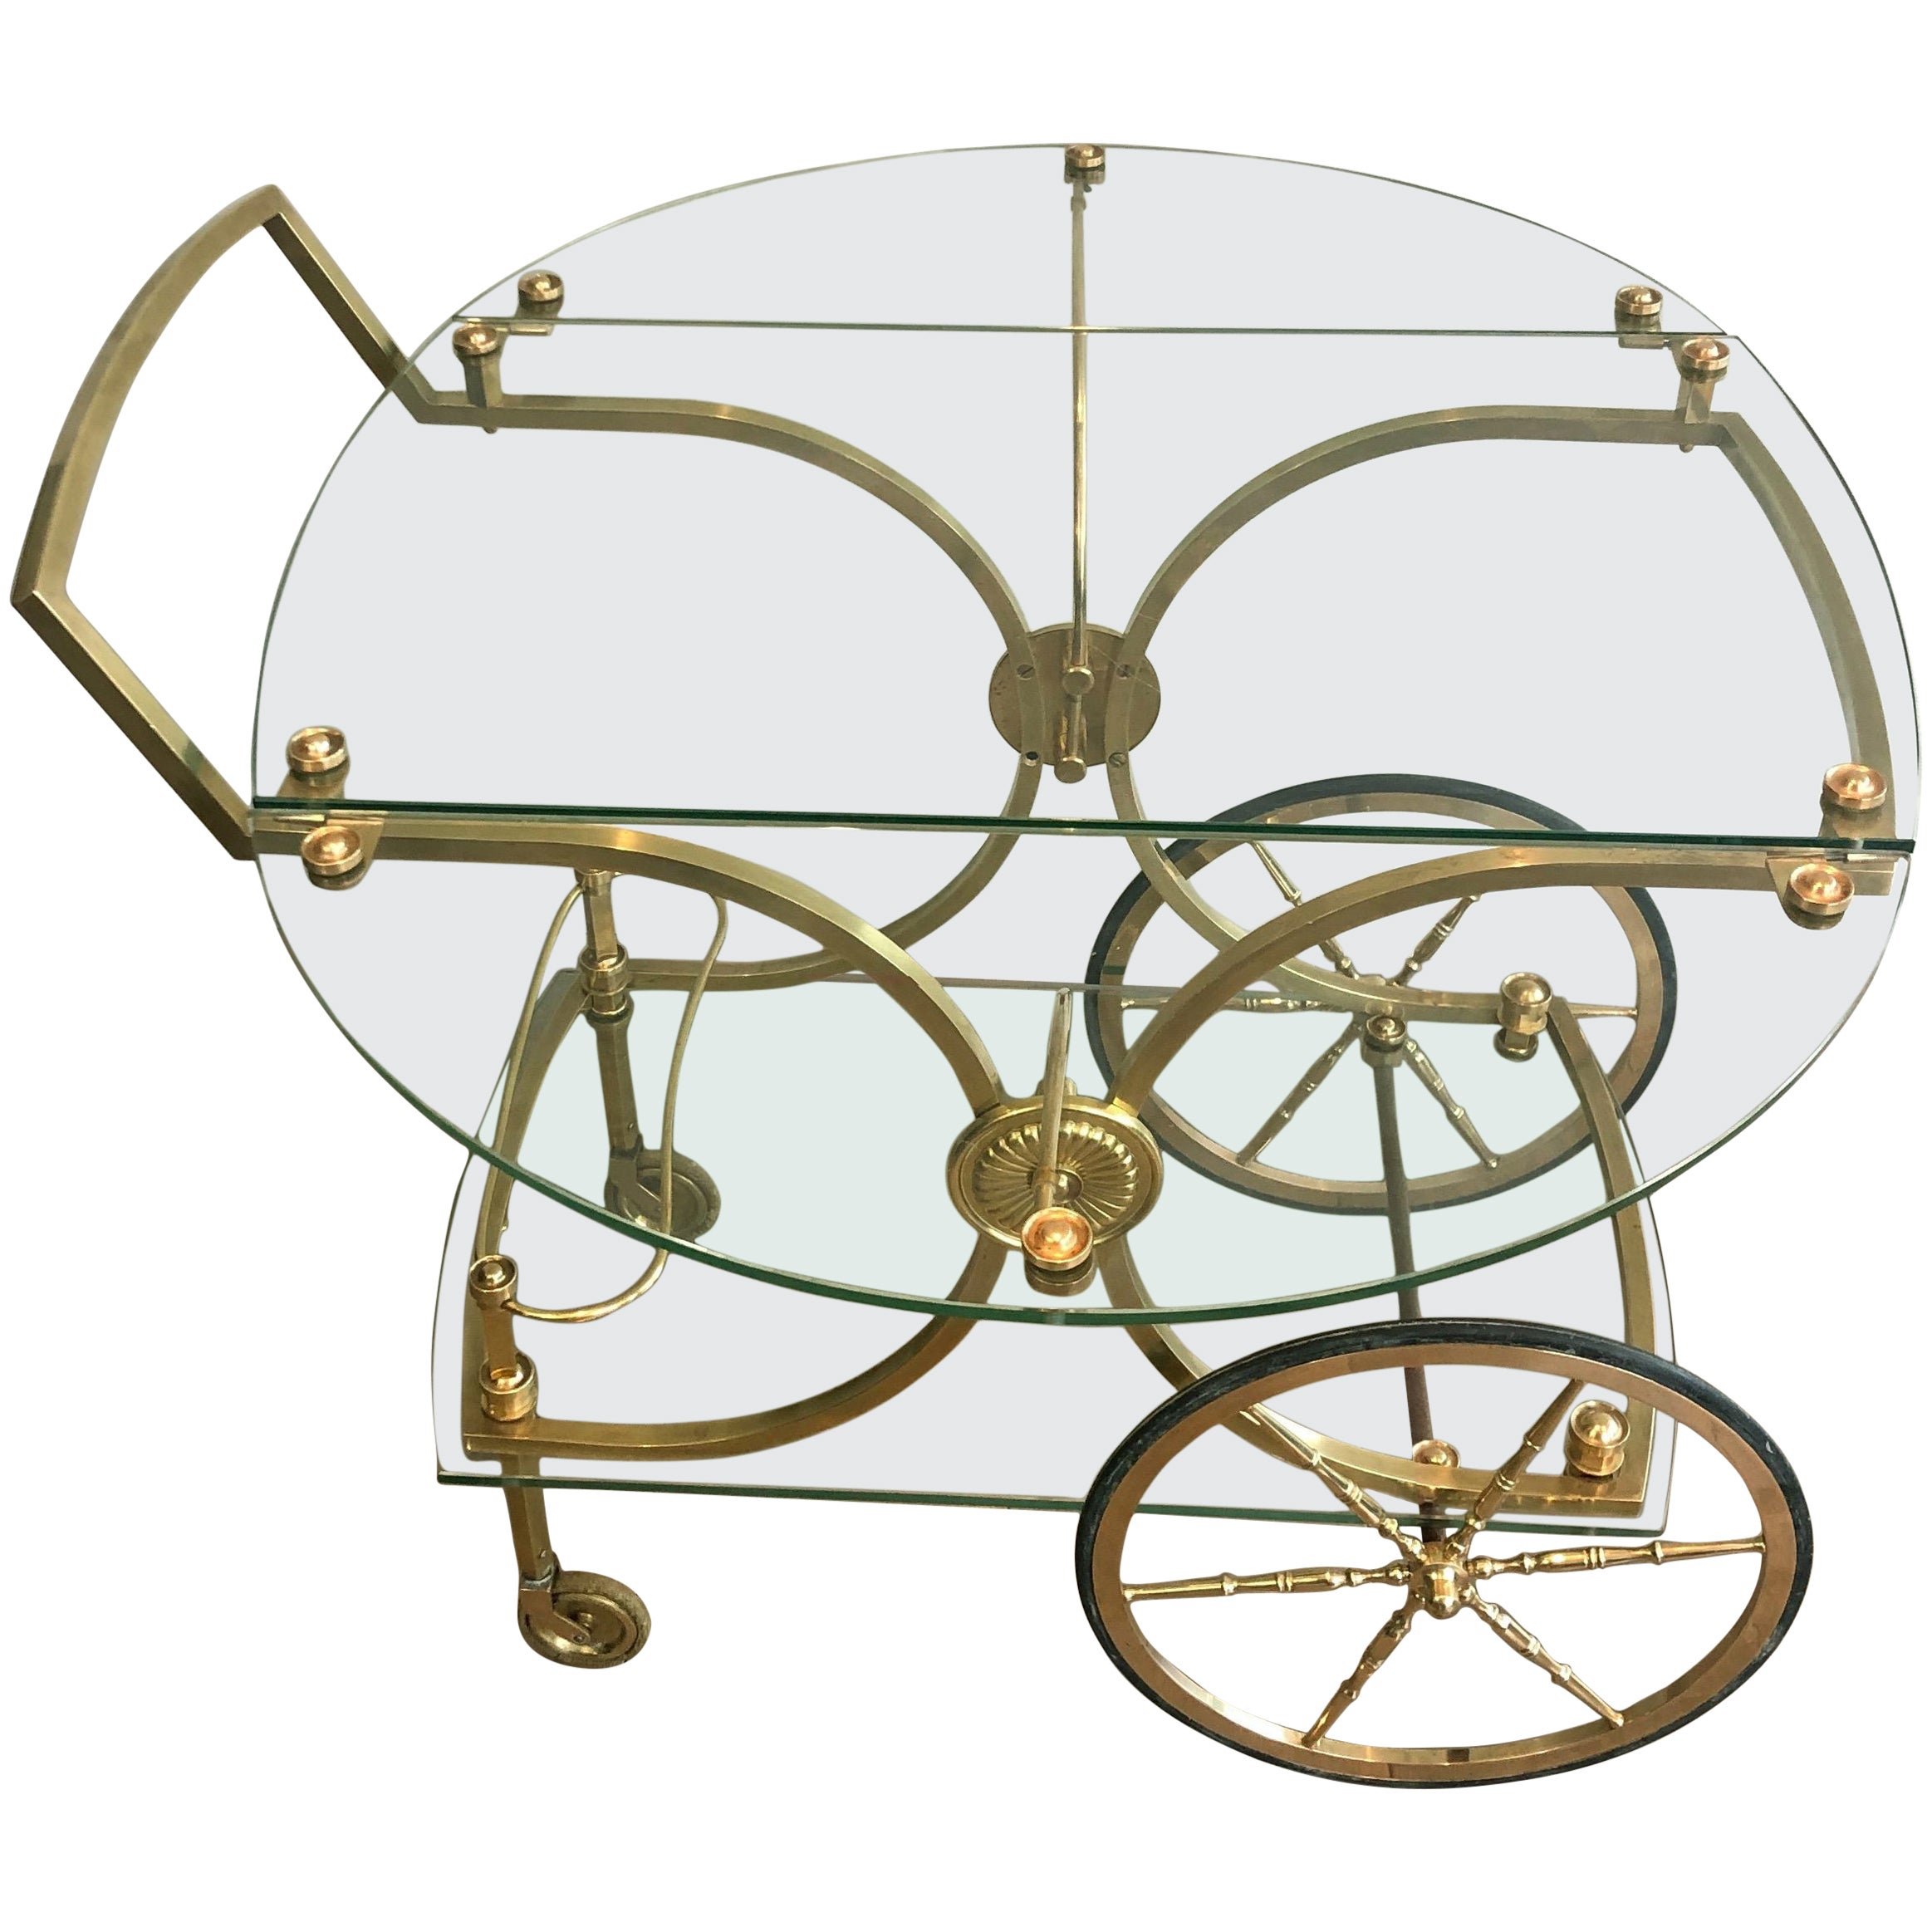 Maison Bagués, Rare Neoclassical Style Brass and Glass Drinks Trolley